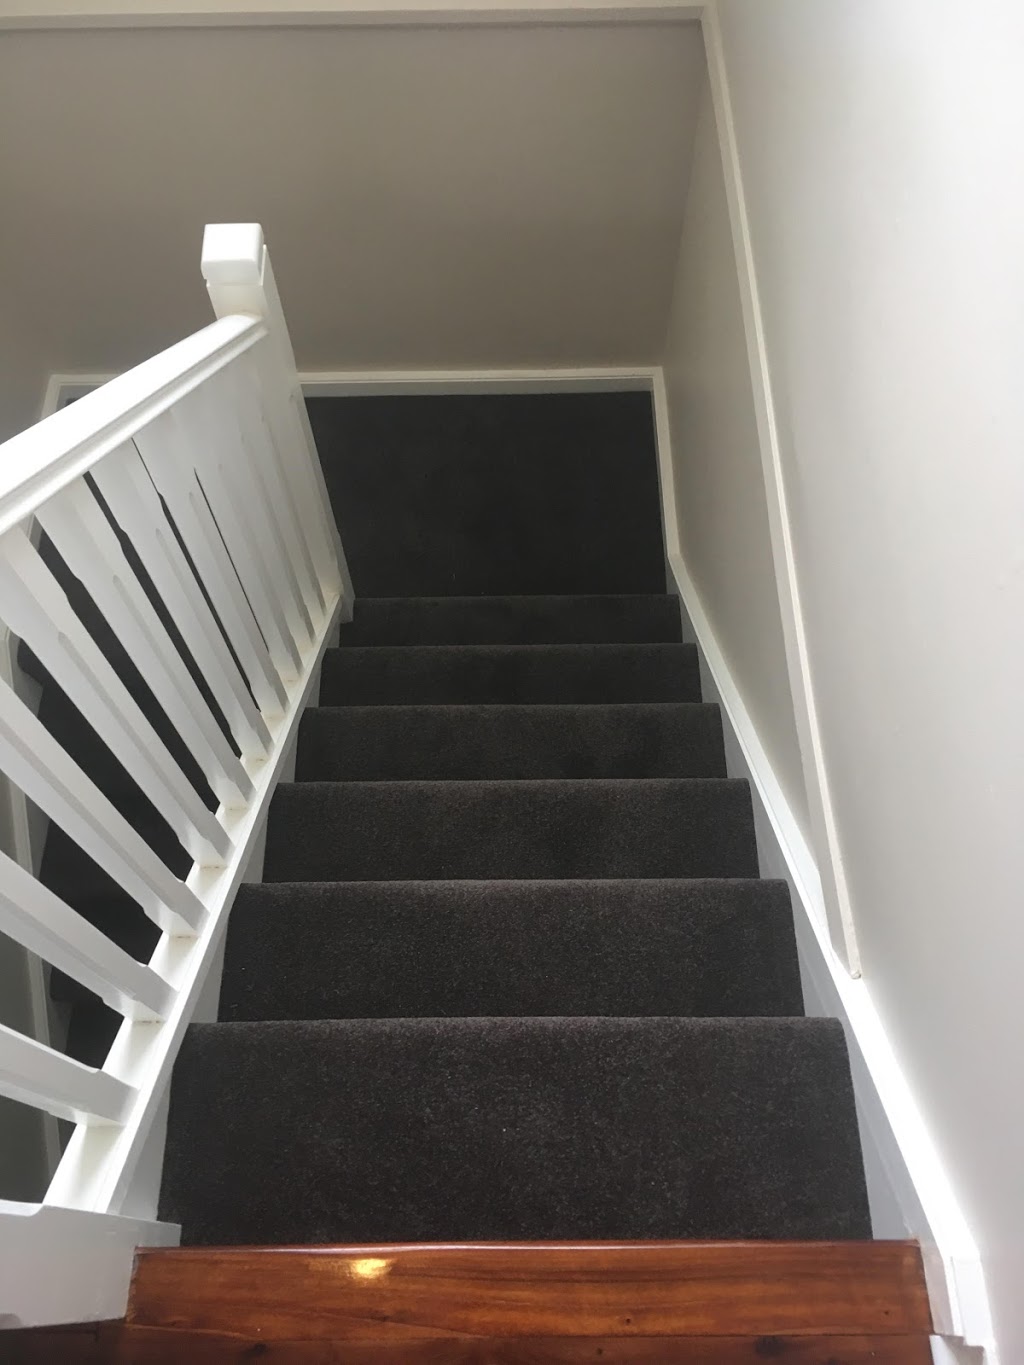 Carpet Removal Sydney | moving company | 6 Francis St, Dee Why NSW 2099, Australia | 0424408330 OR +61 424 408 330